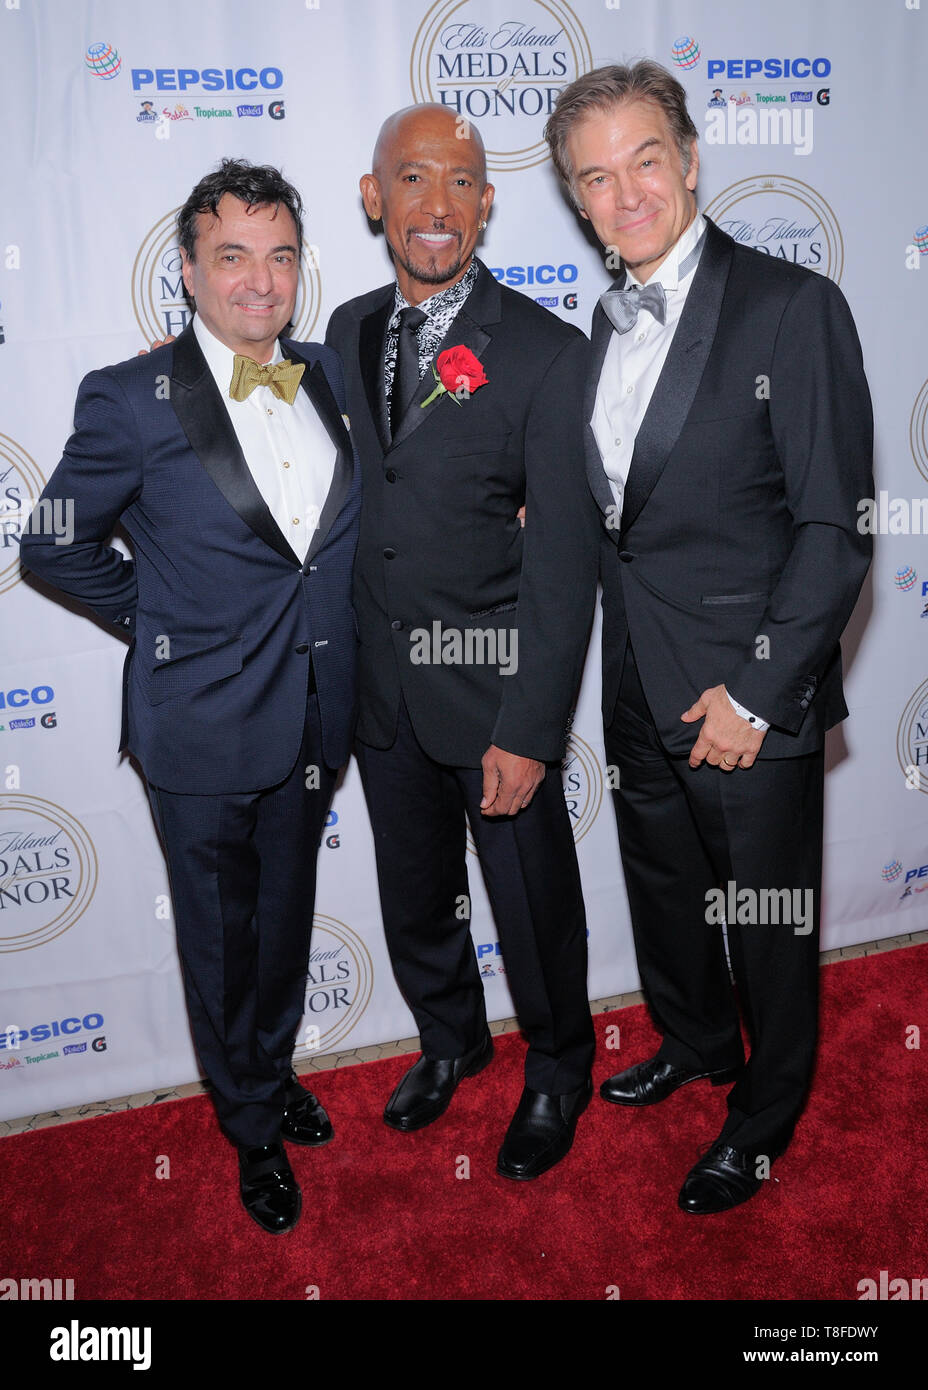 Ellis Island, NY - May 11, 2019: Guest, Montel Williams and Mehmet Oz attend the 34th Annual Ellis Island Medals Of Honor Ceremony at Ellis Island Stock Photo